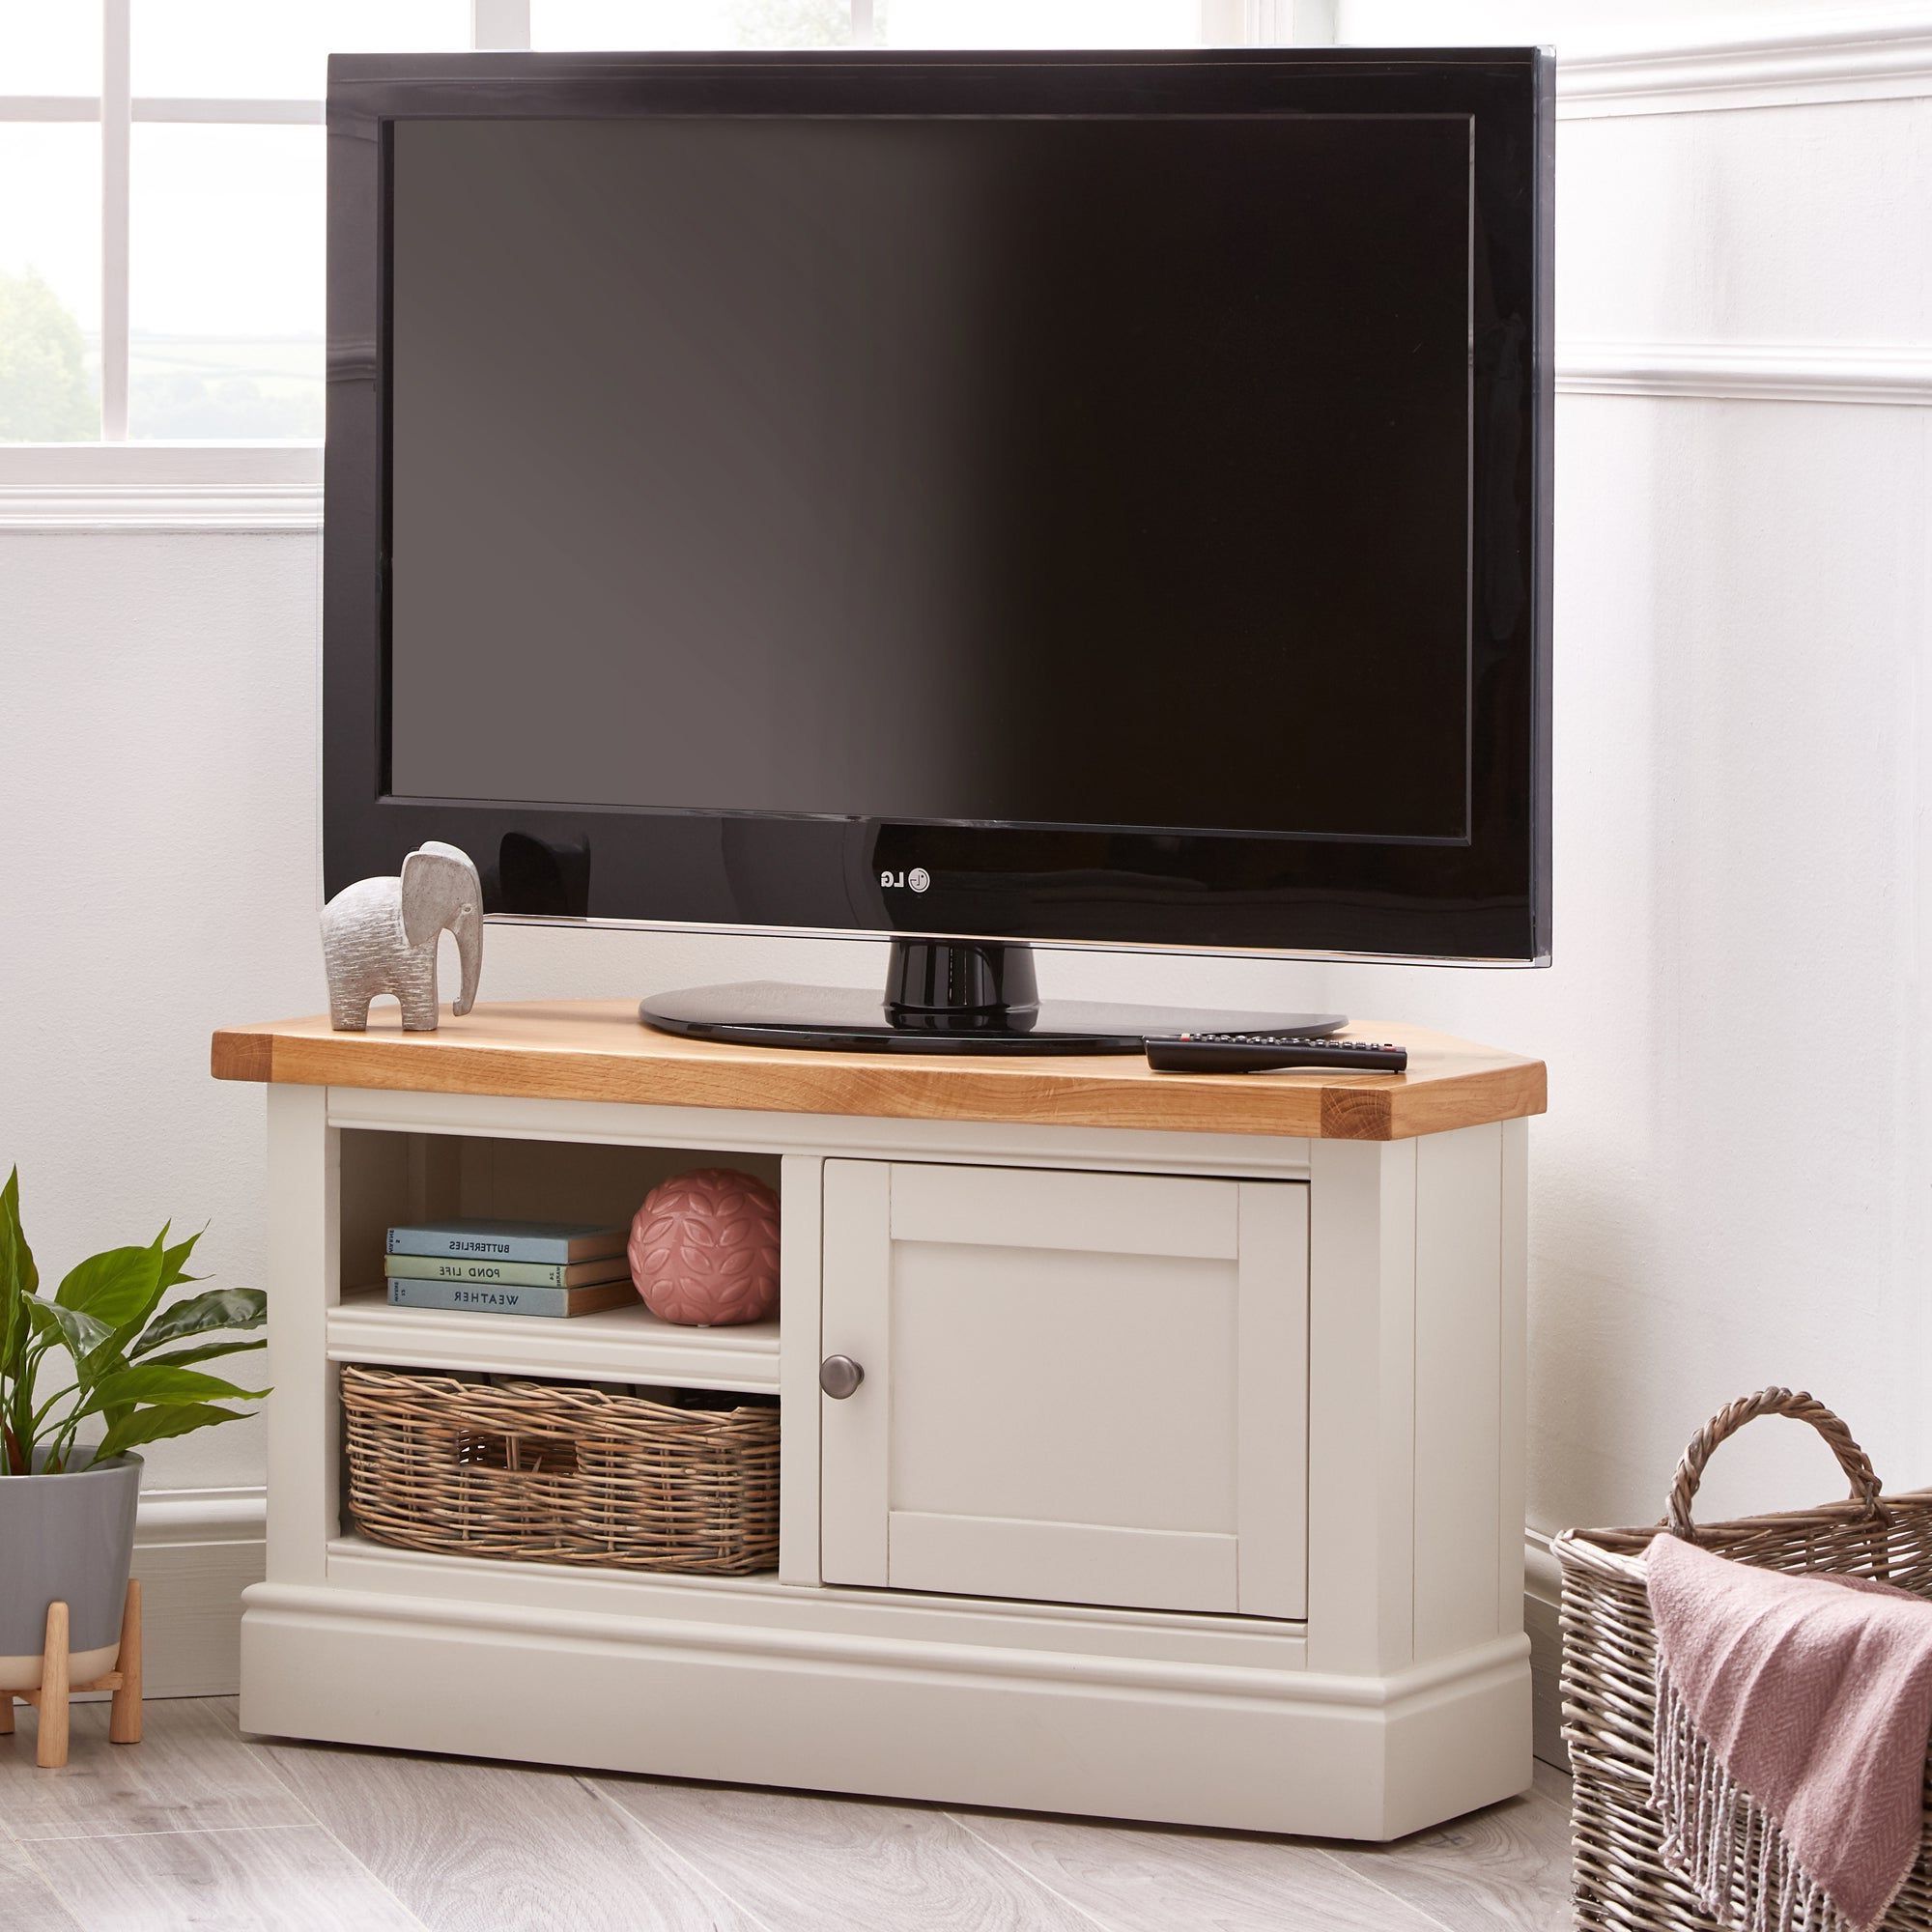 Modern Corner Compton Ivory Large Tv Stands (Photo 6 of 7)